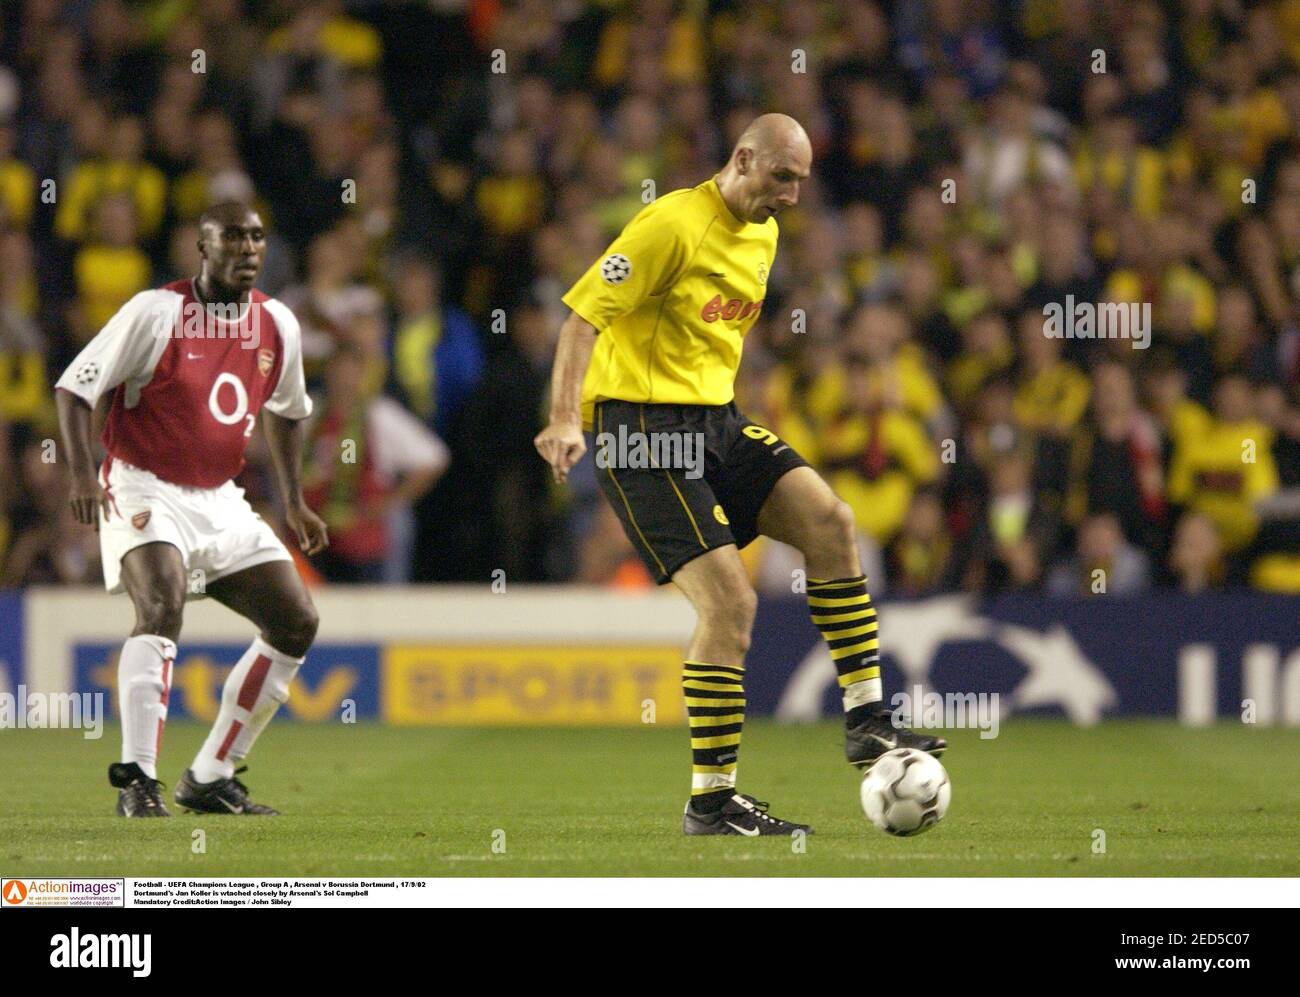 Football - UEFA Champions League , Group A , Arsenal v Borussia Dortmund ,  17/9/02 Dortmund's Jan Koller is wtached closely by Arsenal's Sol Campbell  Mandatory Credit:Action Images / John Sibley Stock Photo - Alamy